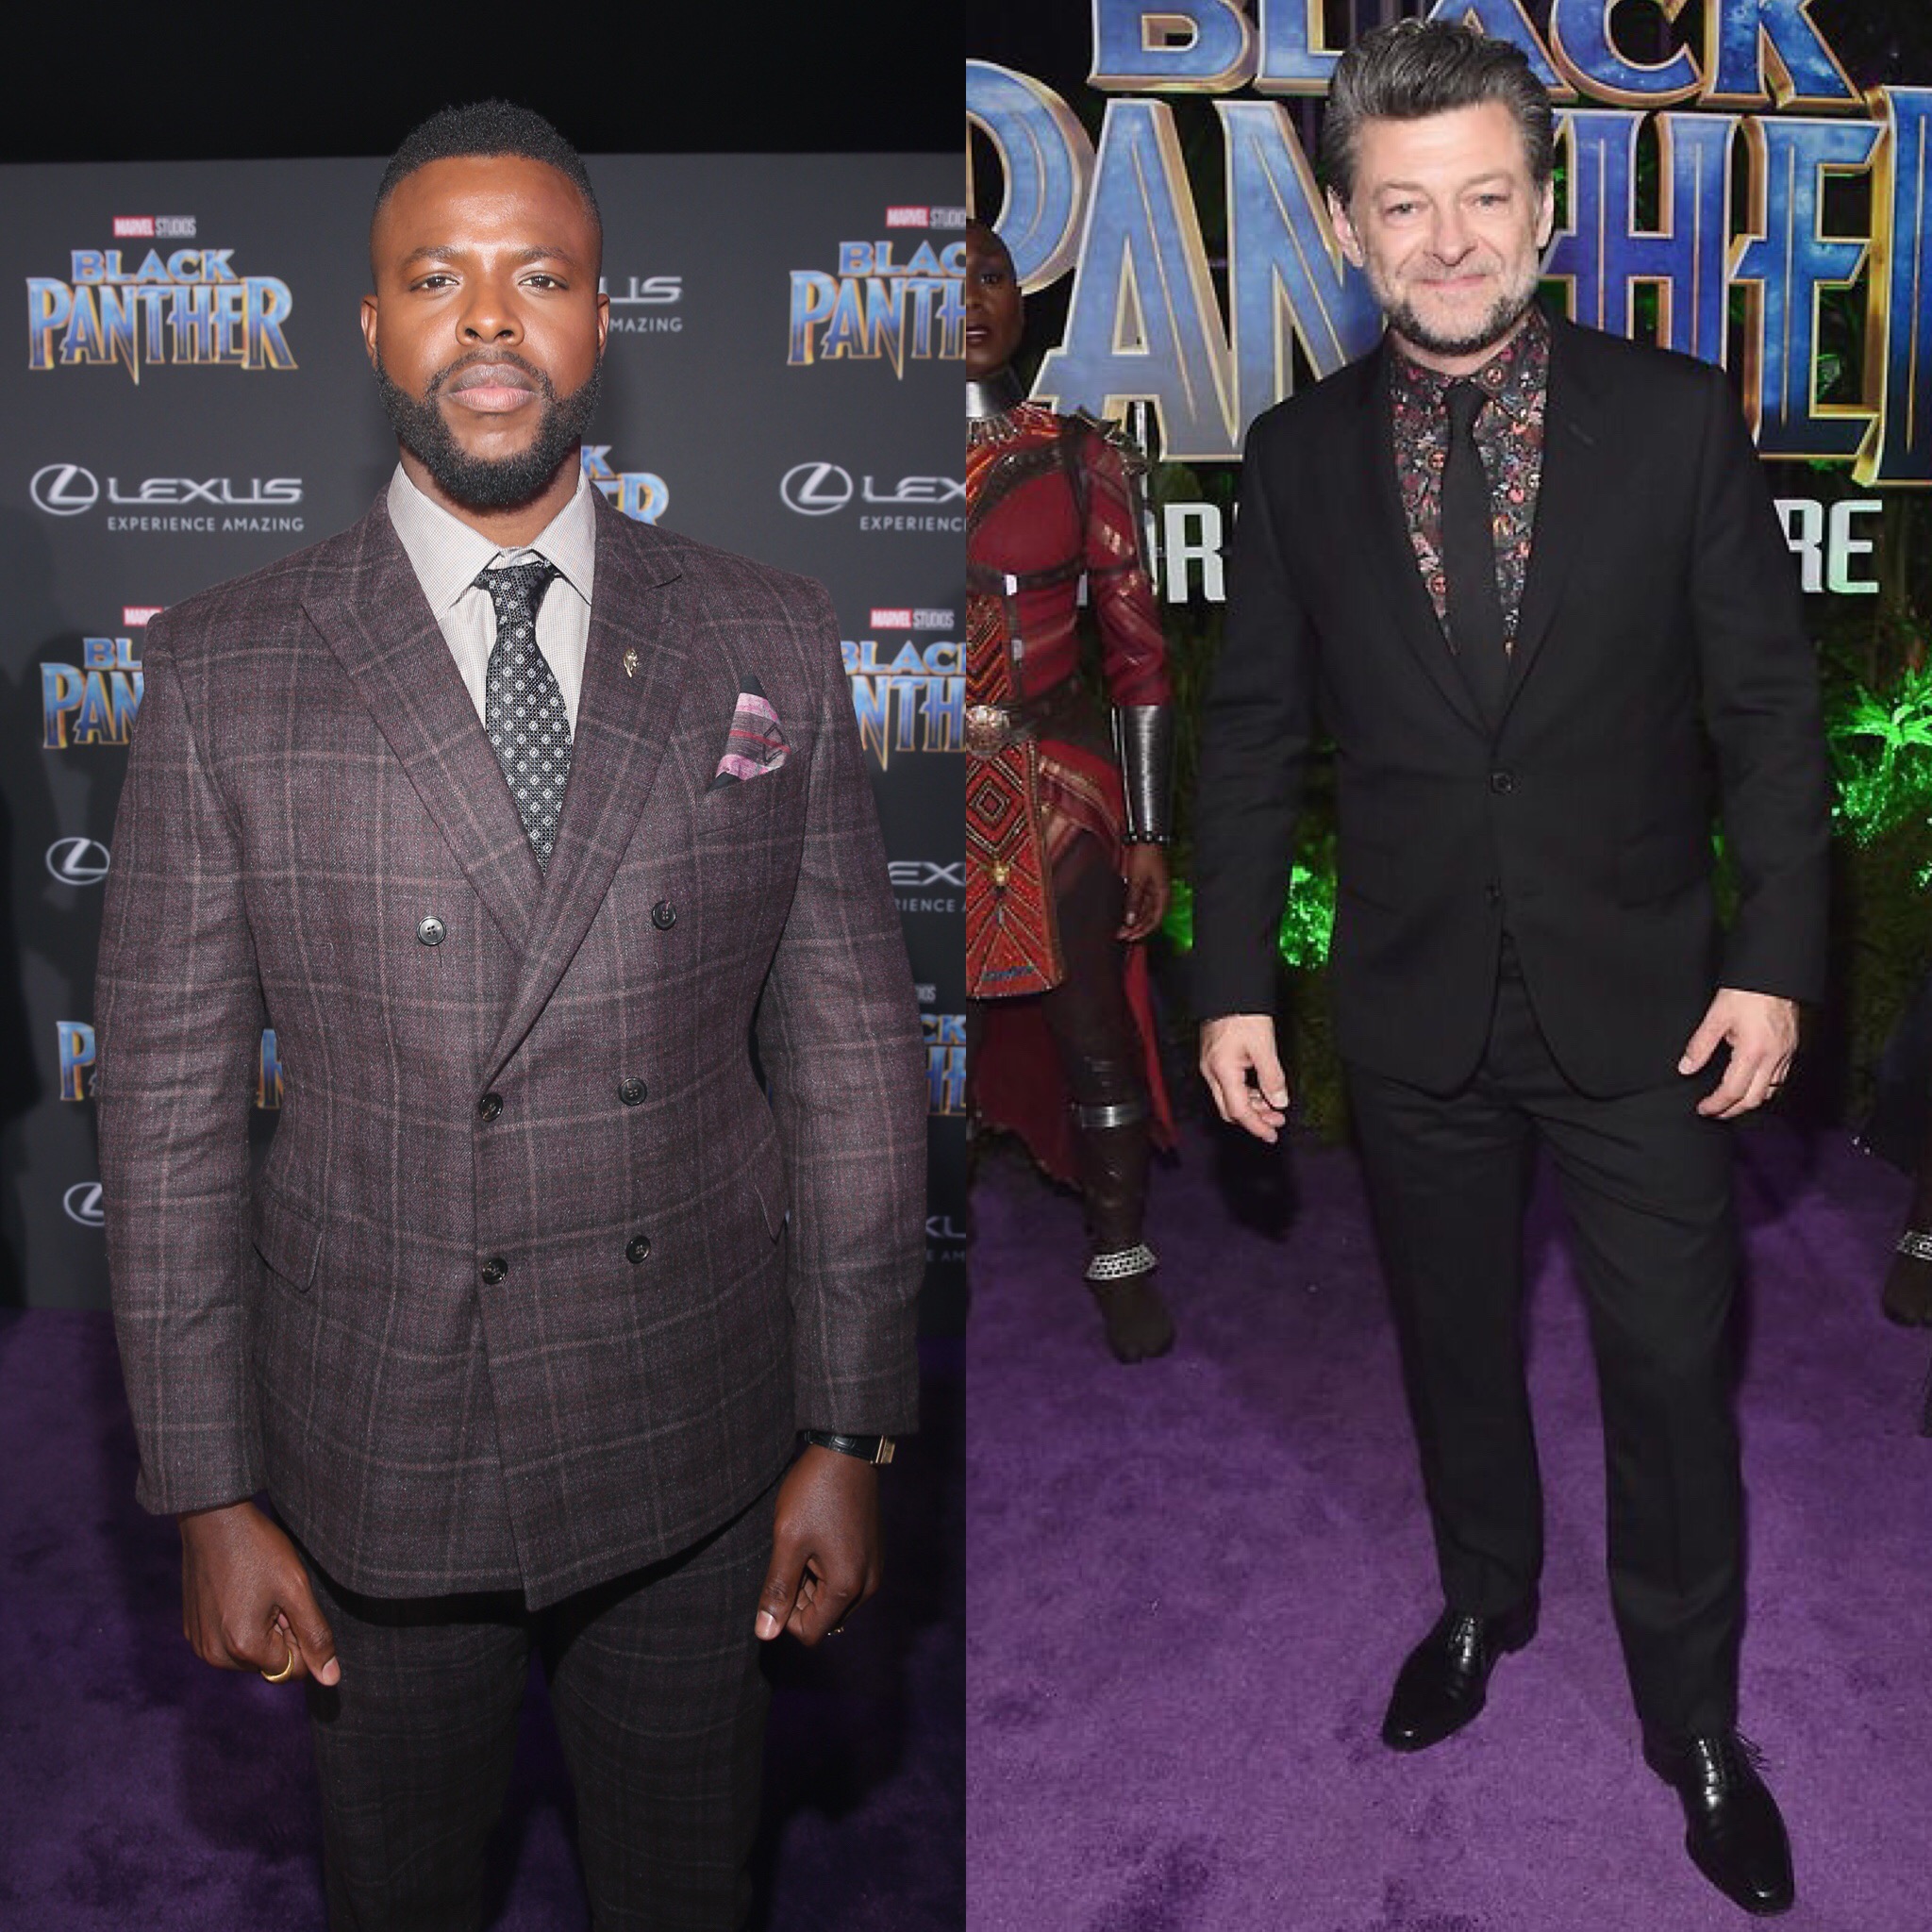 Round Table Discussion With Winston Duke & Andy Serkis From Black Panther